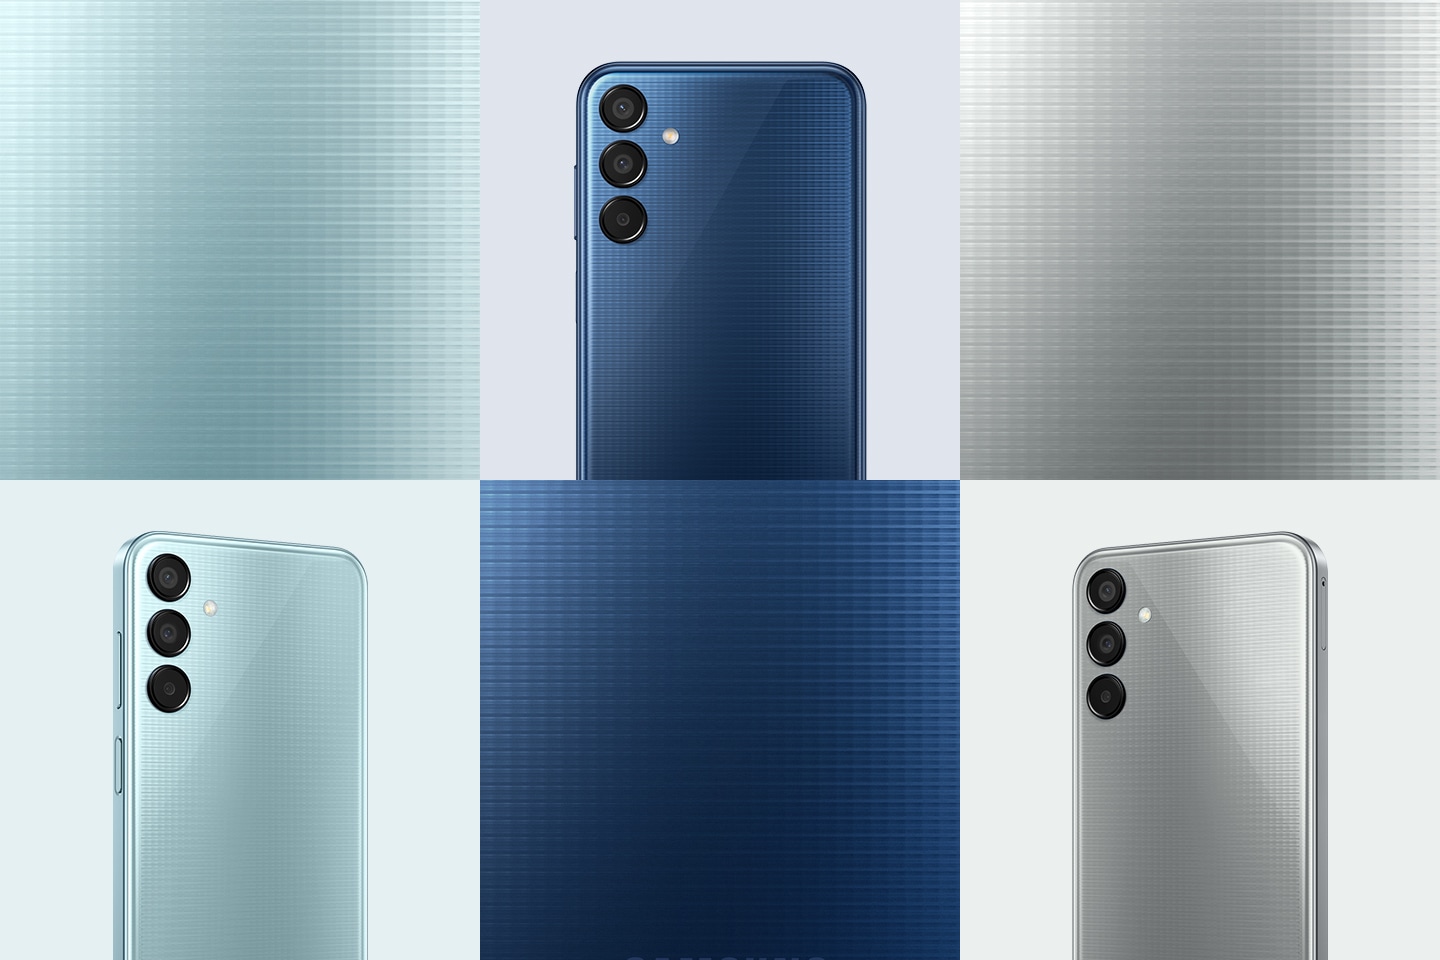 Three Galaxy M15 5Gs in Light Blue, Dark Blue and Gray are shown displaying their back covers. Each colorway is shown along with a full shot of close-ups of the backcovers, showing the colorway and rear patterns in detail.